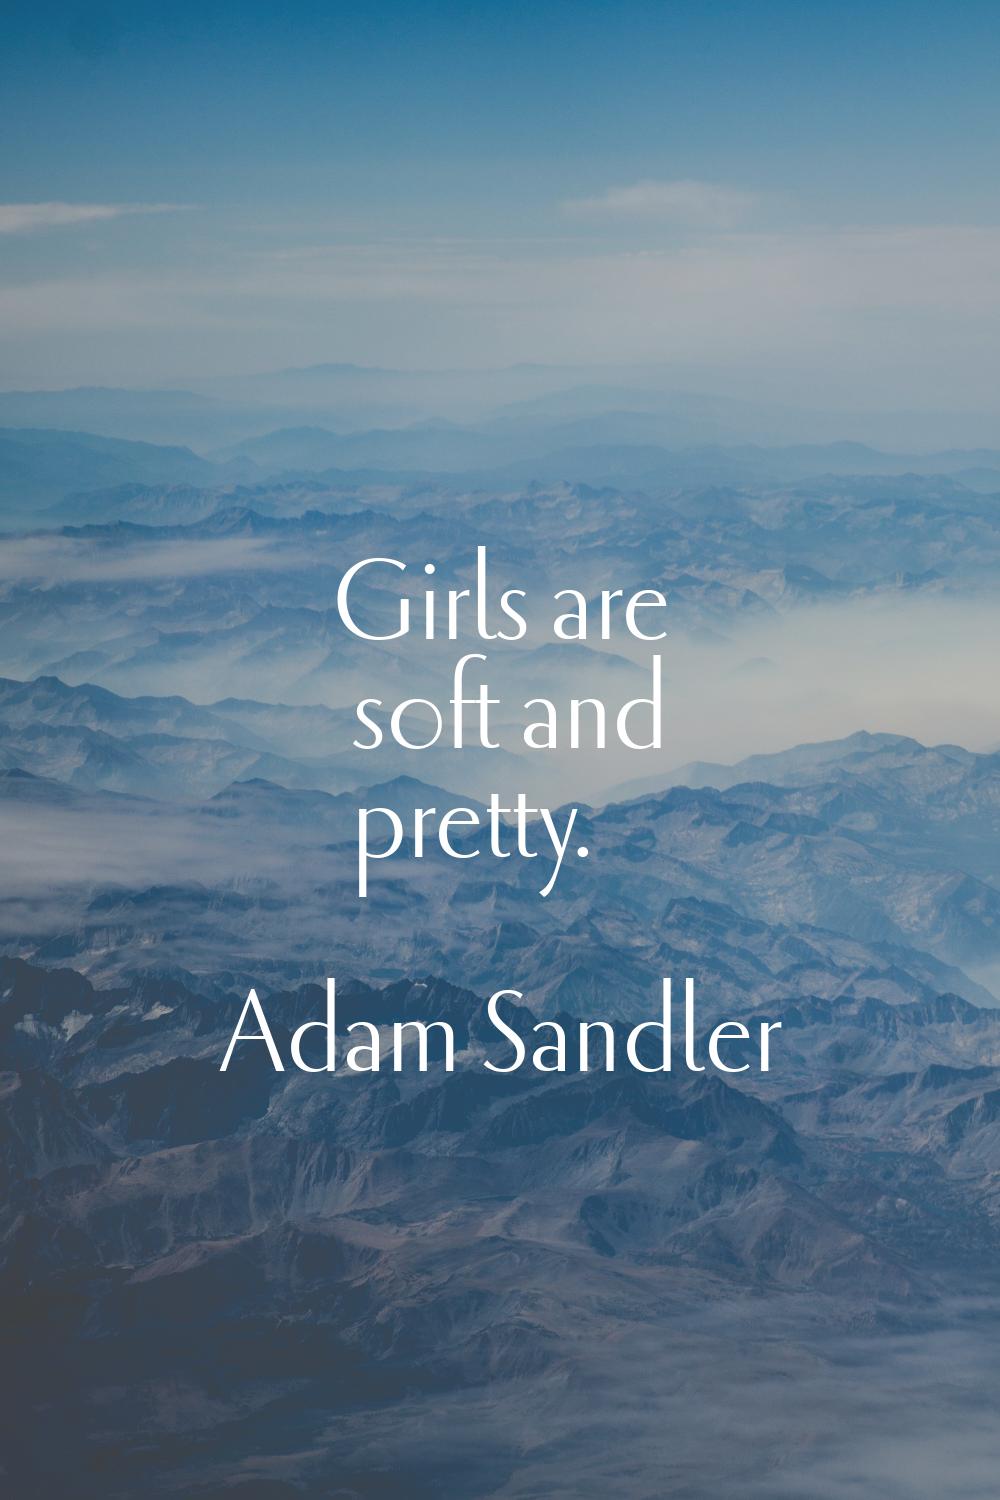 Girls are soft and pretty.